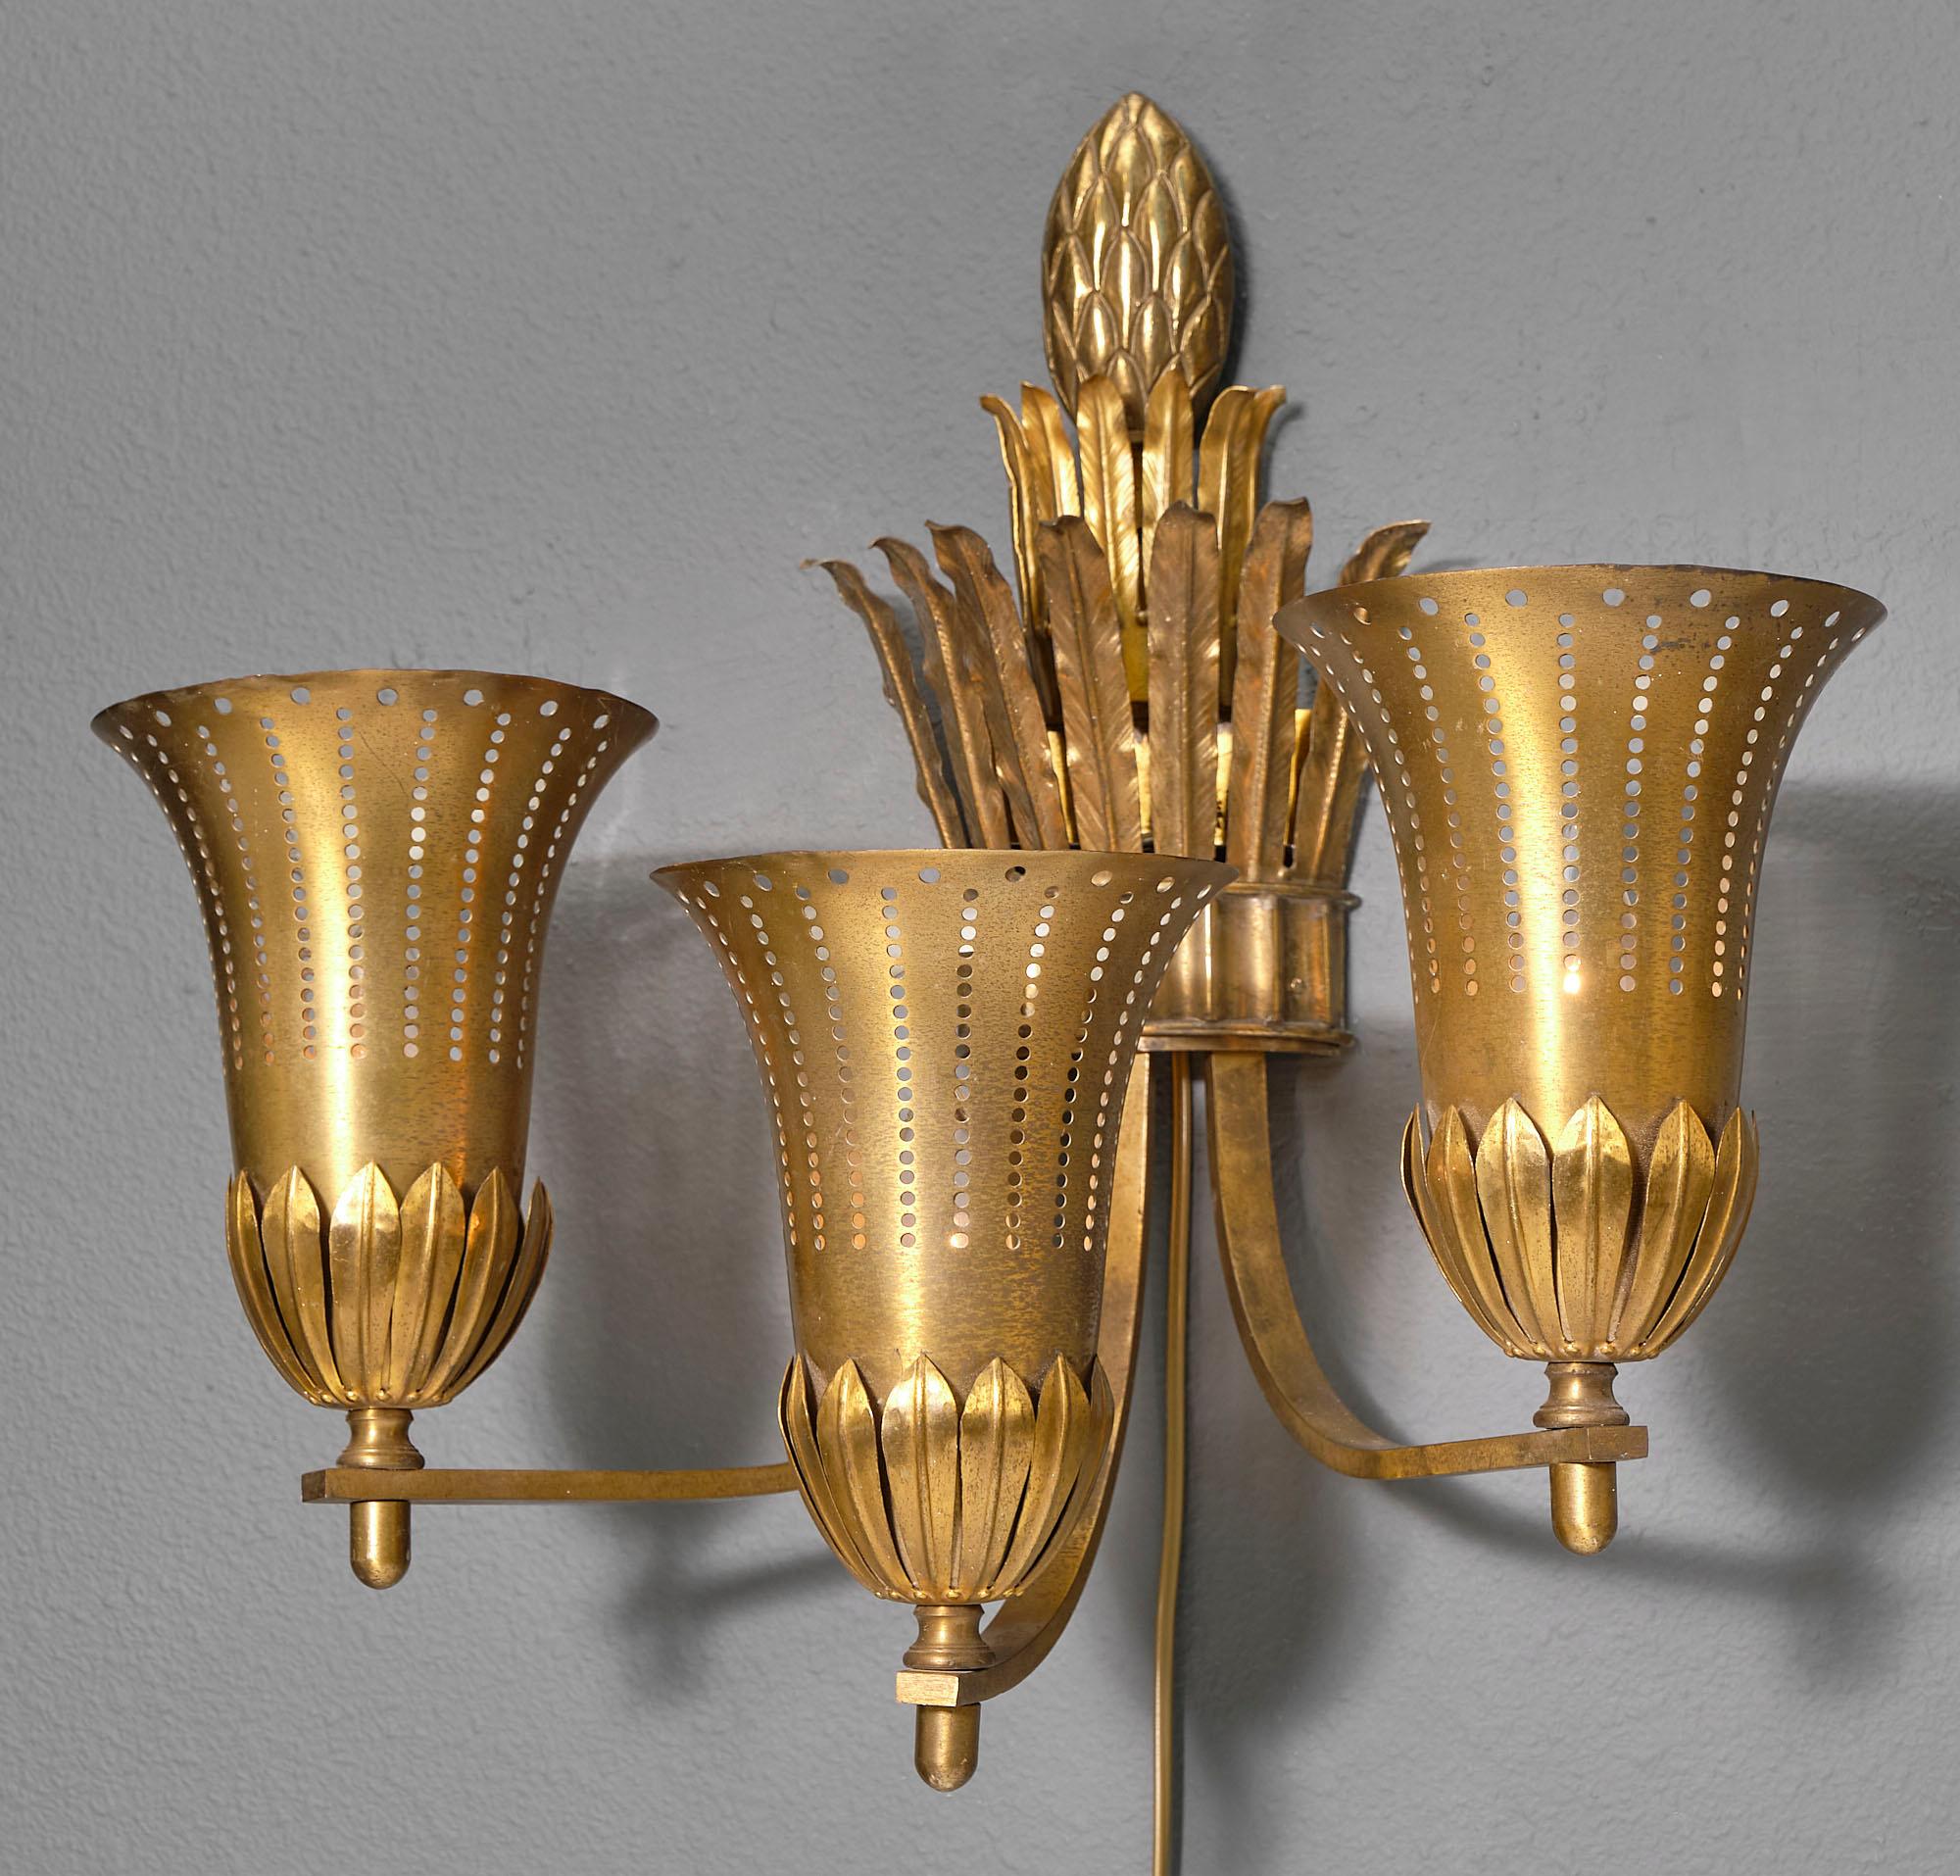 Single Art Deco brass sconce made of gilt brass and tole from Europe. This piece has been newly wired to fit US standards.